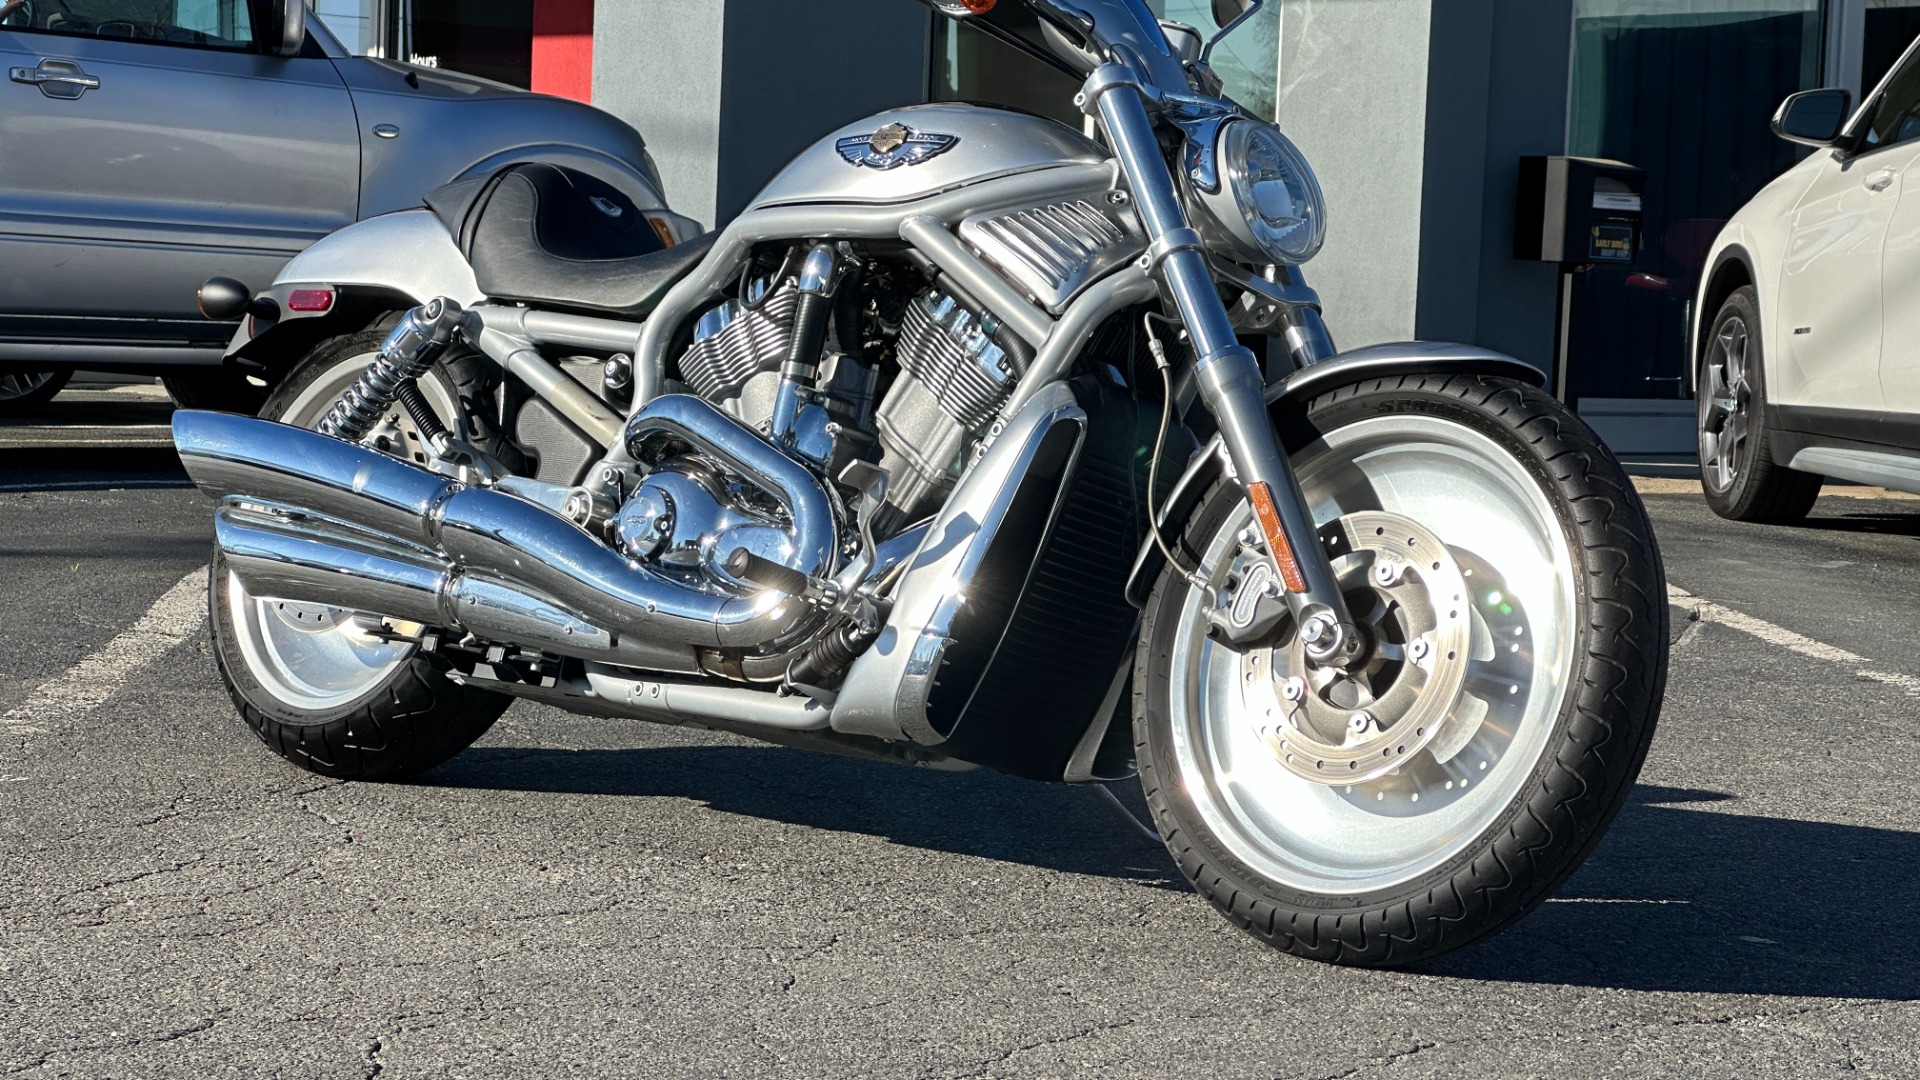 Used 2003 Harley Davidson V Rod ANNIVERSARY EDITION / 1130CC ENGINE / BREMBO BRAKES / VORTEX AIR SCOOPS for sale $7,995 at Formula Imports in Charlotte NC 28227 53